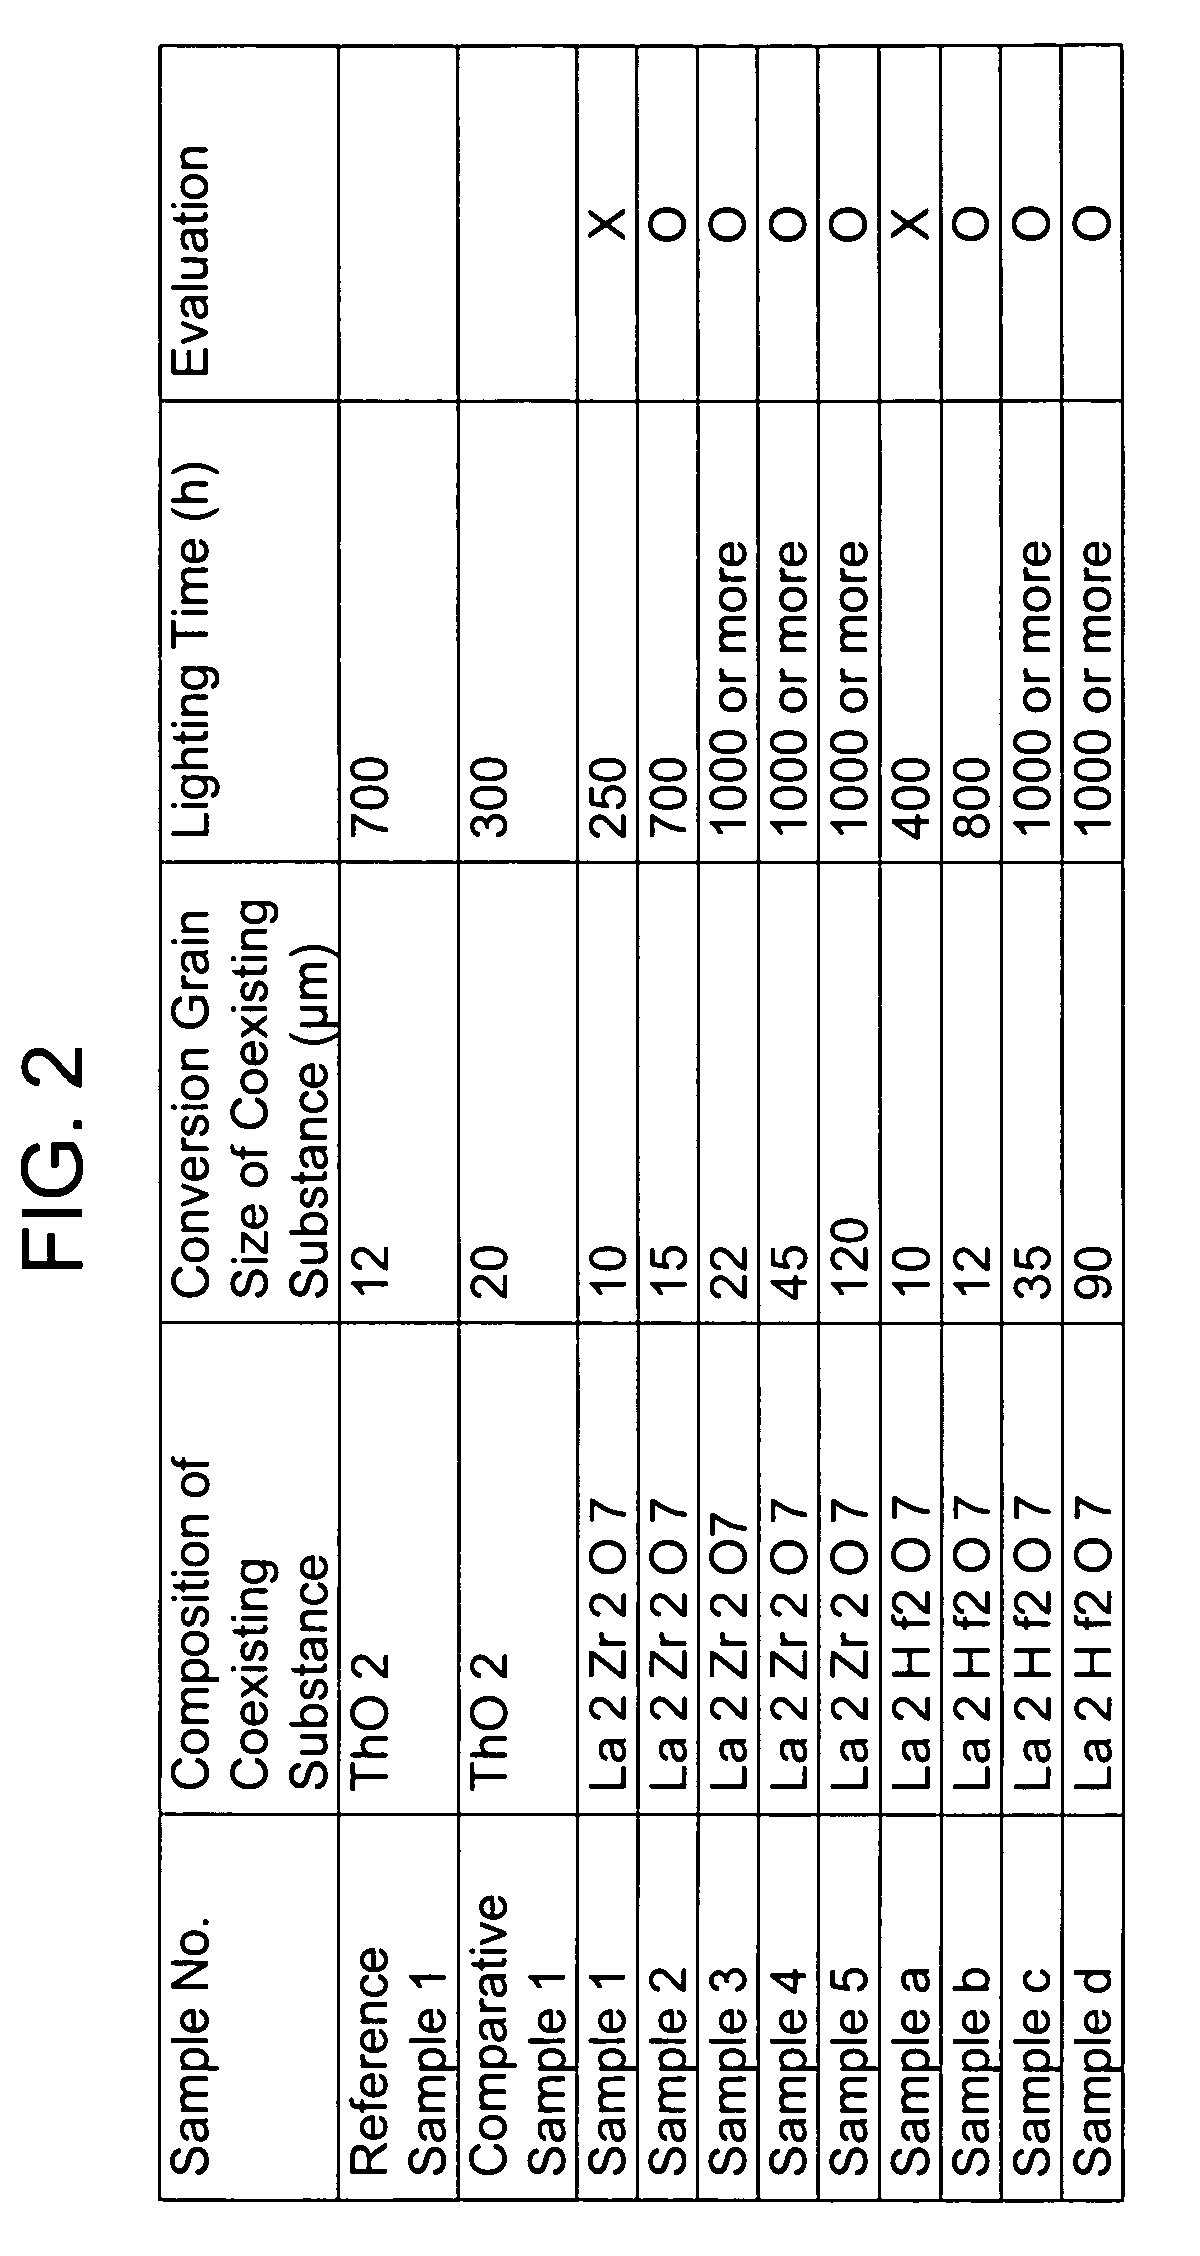 High-load and high-intensity discharge lamp